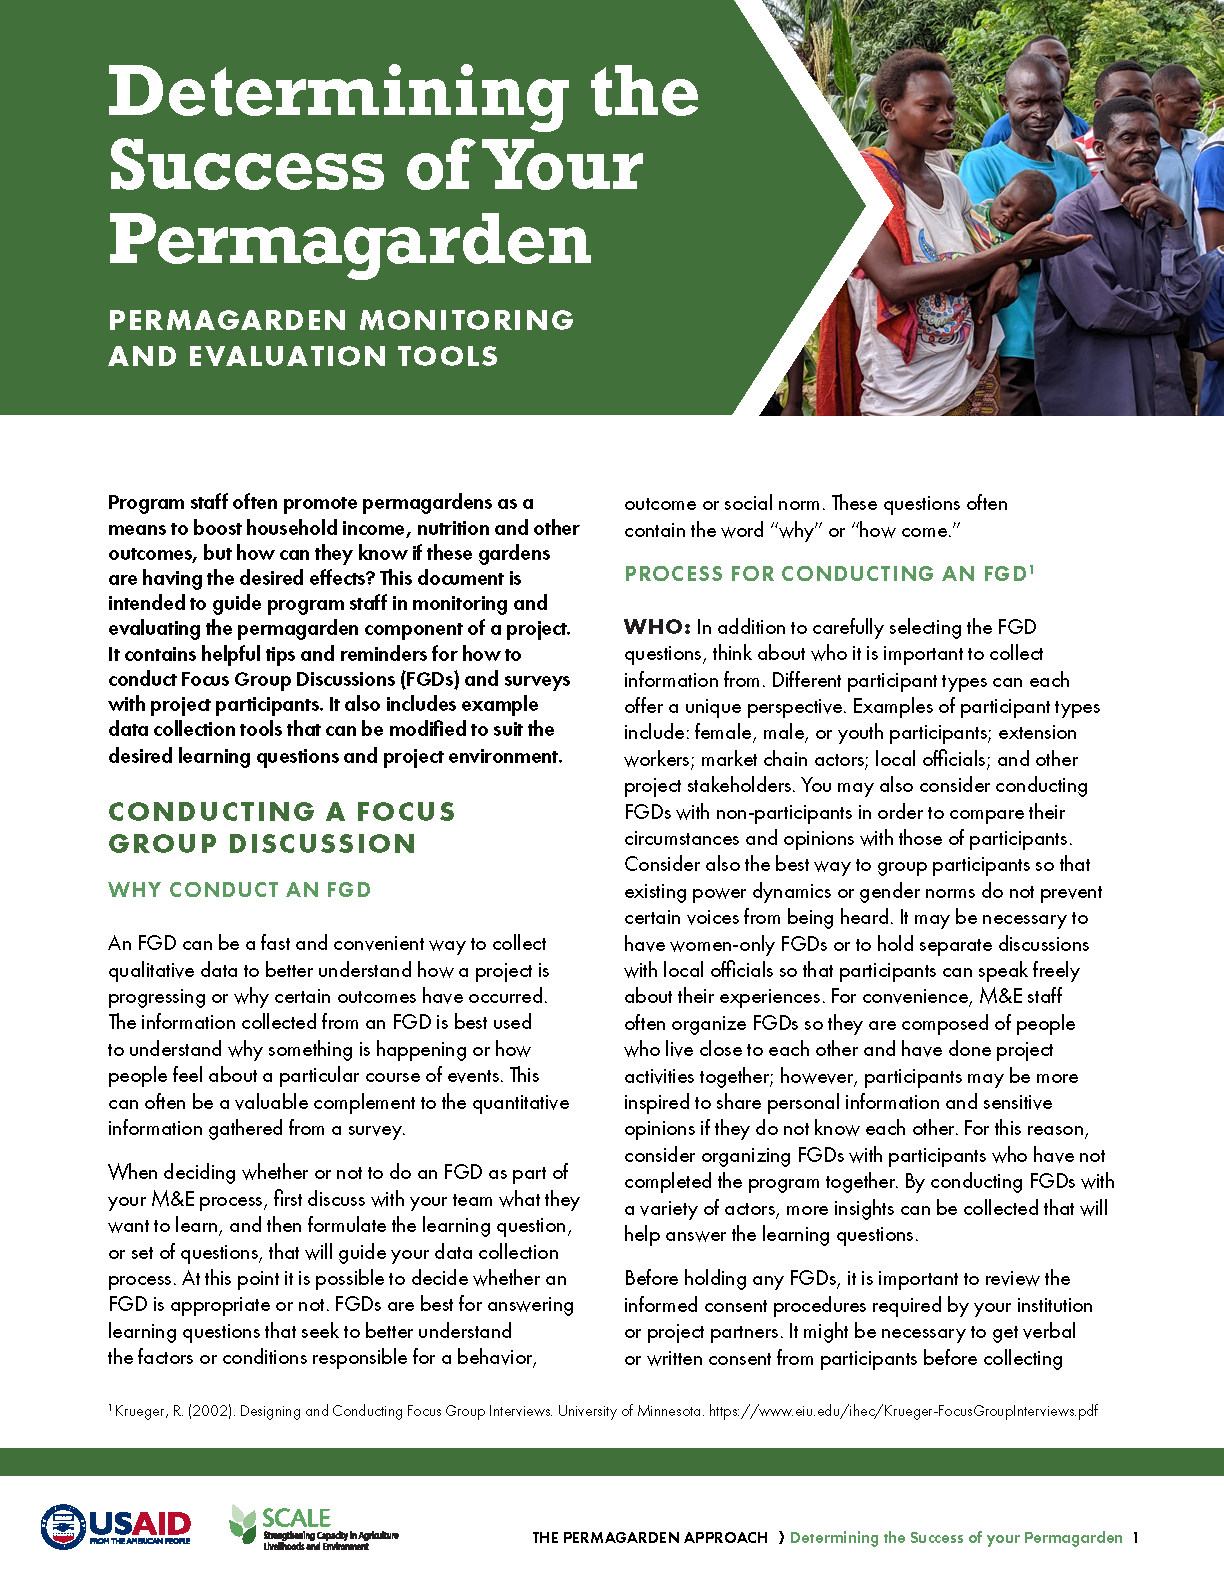 Cover page for 'Determining the Success of Your Permagarden: Permagarden Monitoring and Evaluation Tools